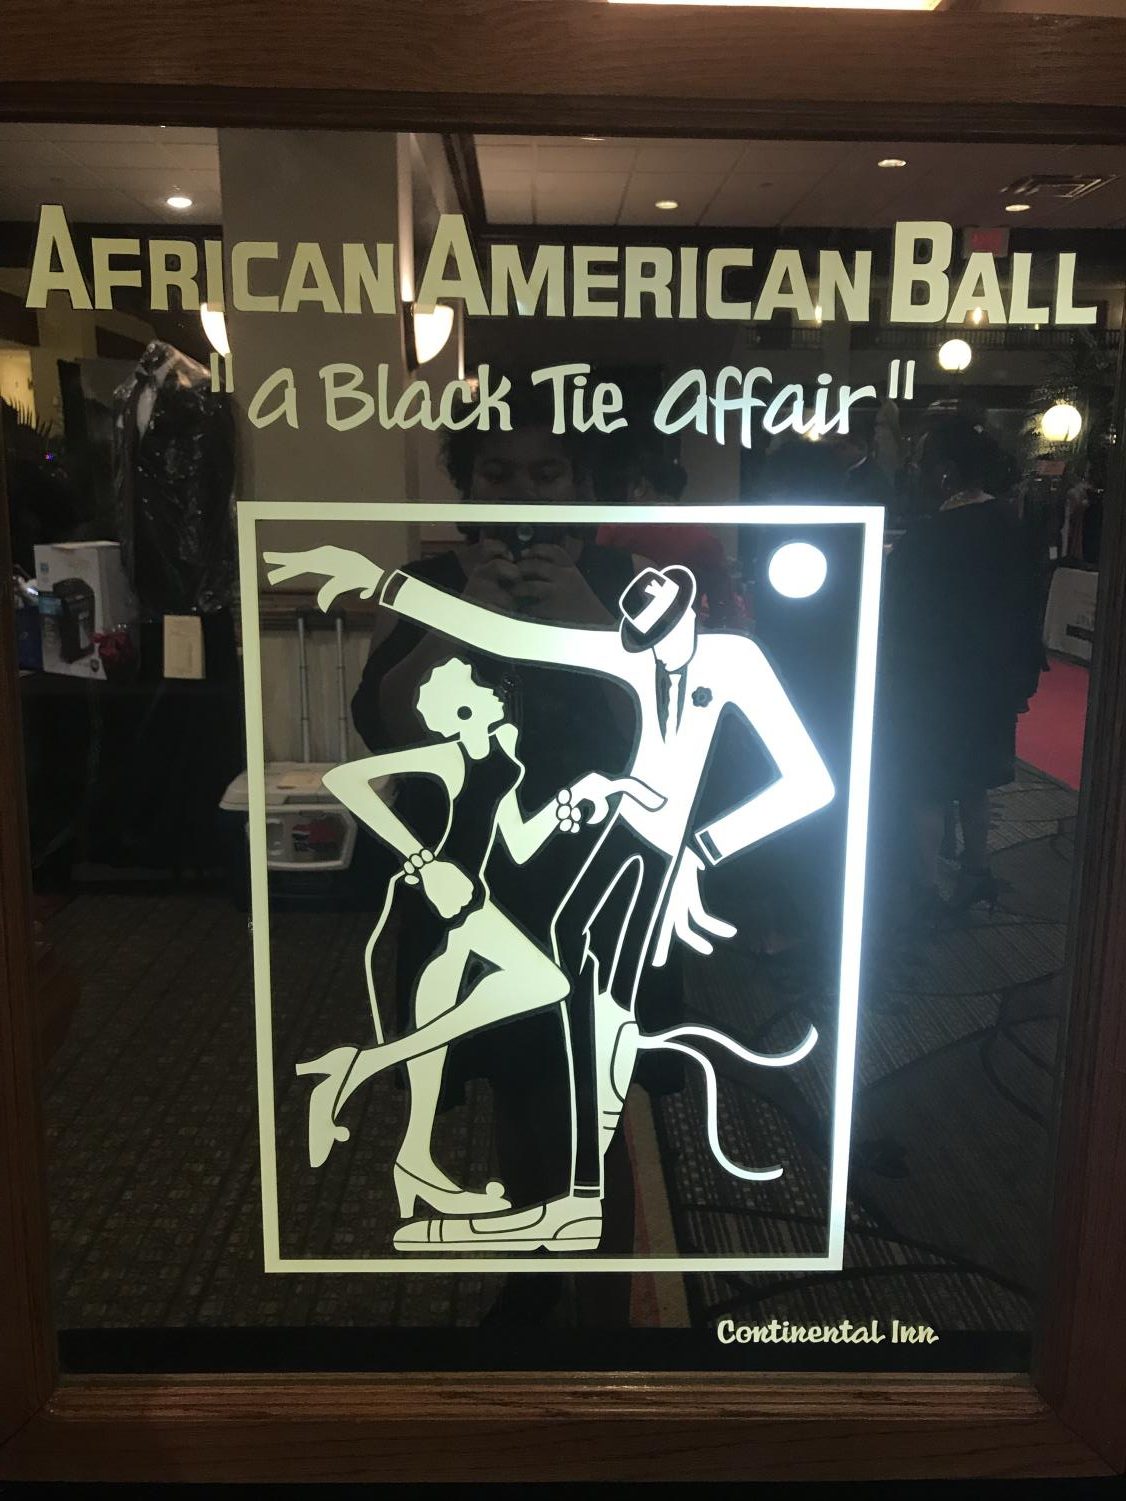 African+American+Grand+Finale+Ball